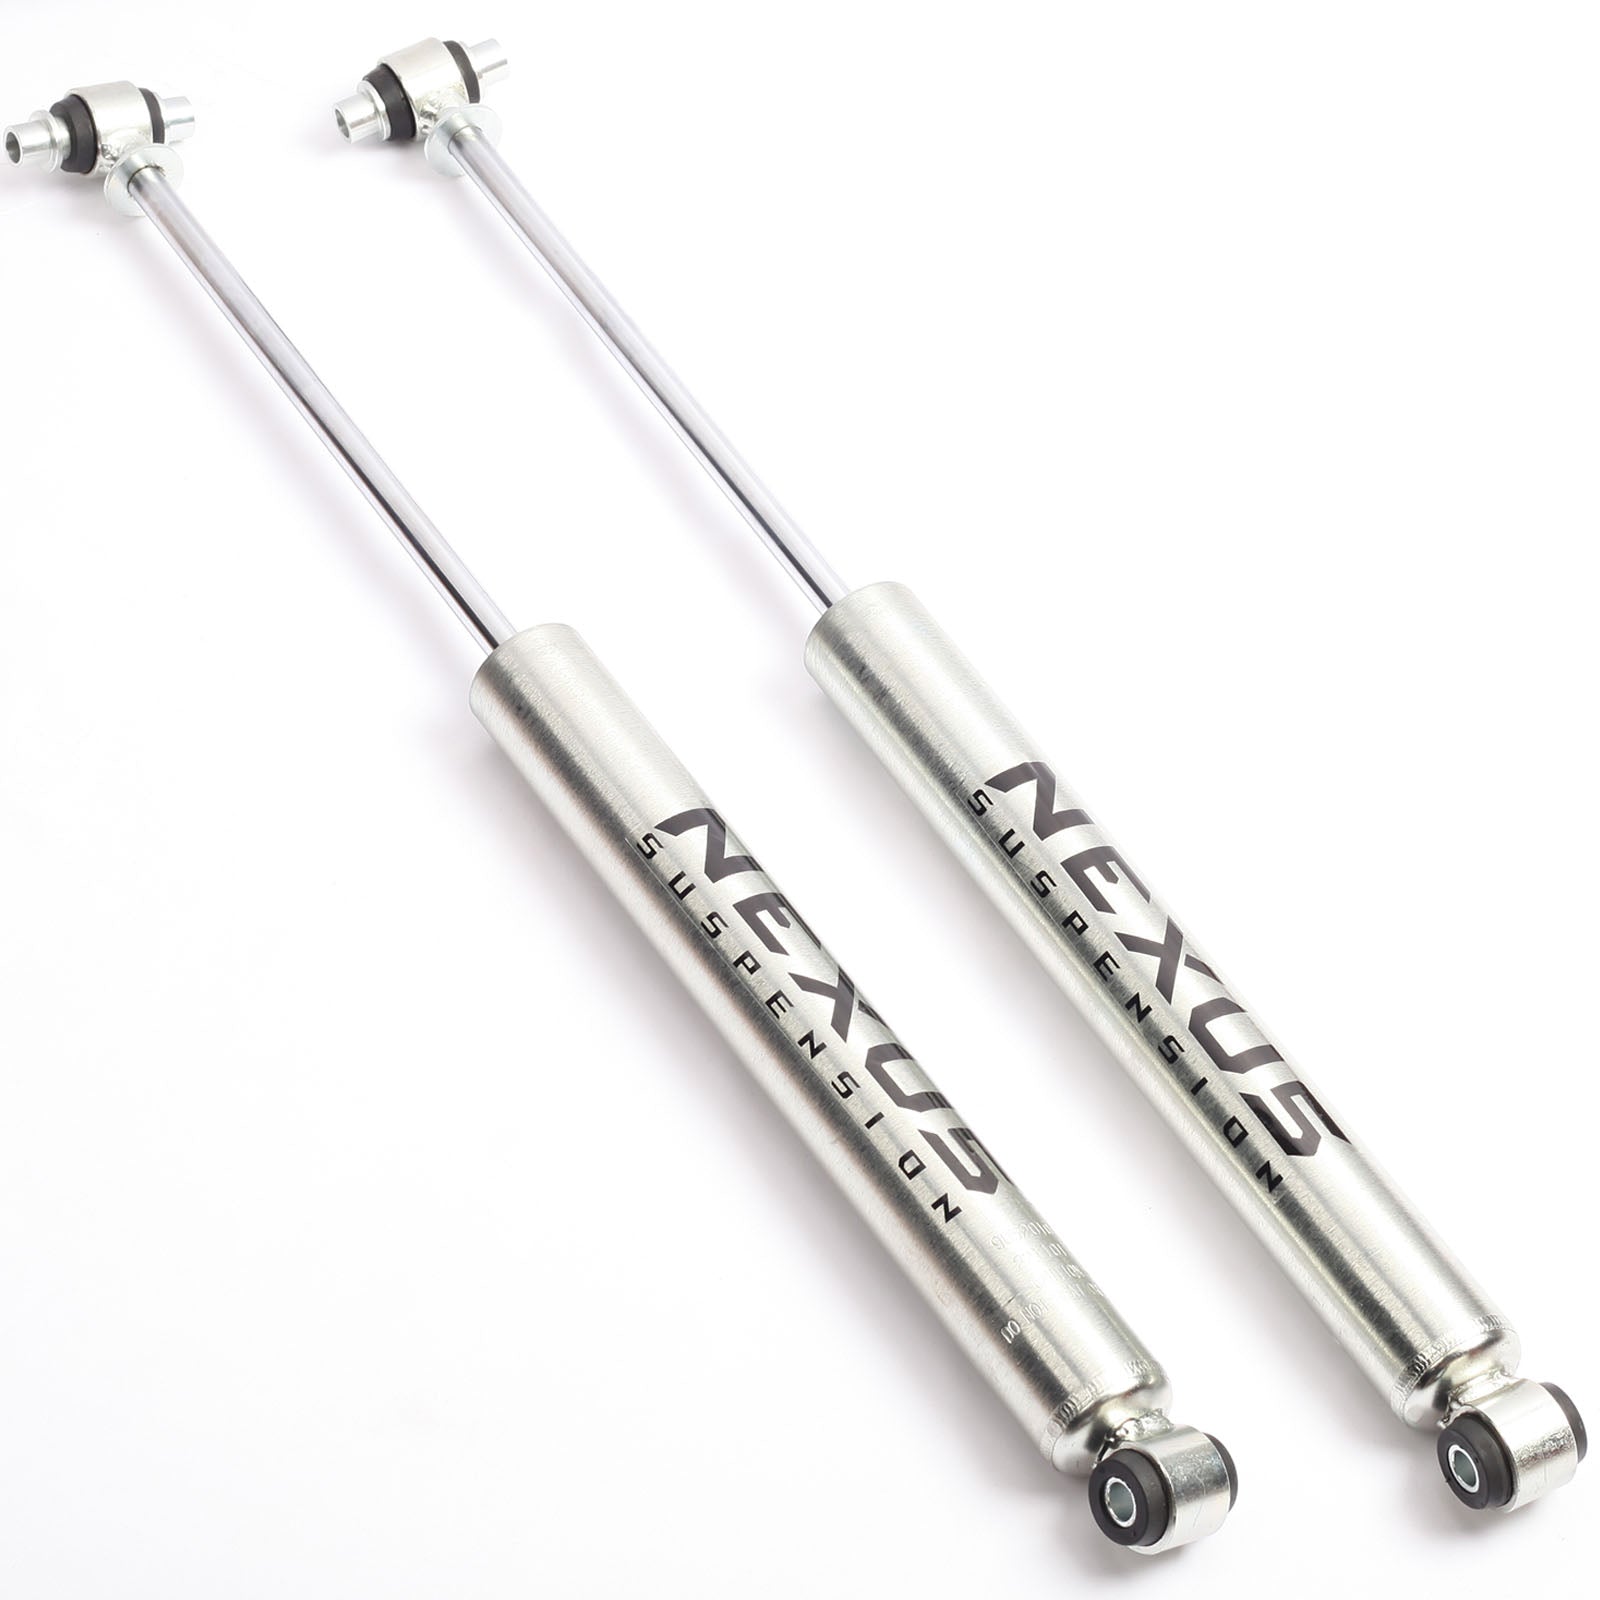 NEXUS SUSPENSION 4 Inch Lift Rear Shock Absorber for 1988-1998 Chevy Silverado 1500 2wd GMC Sierra 1500 2wd,Zinc Plated Coating,Pair Pack